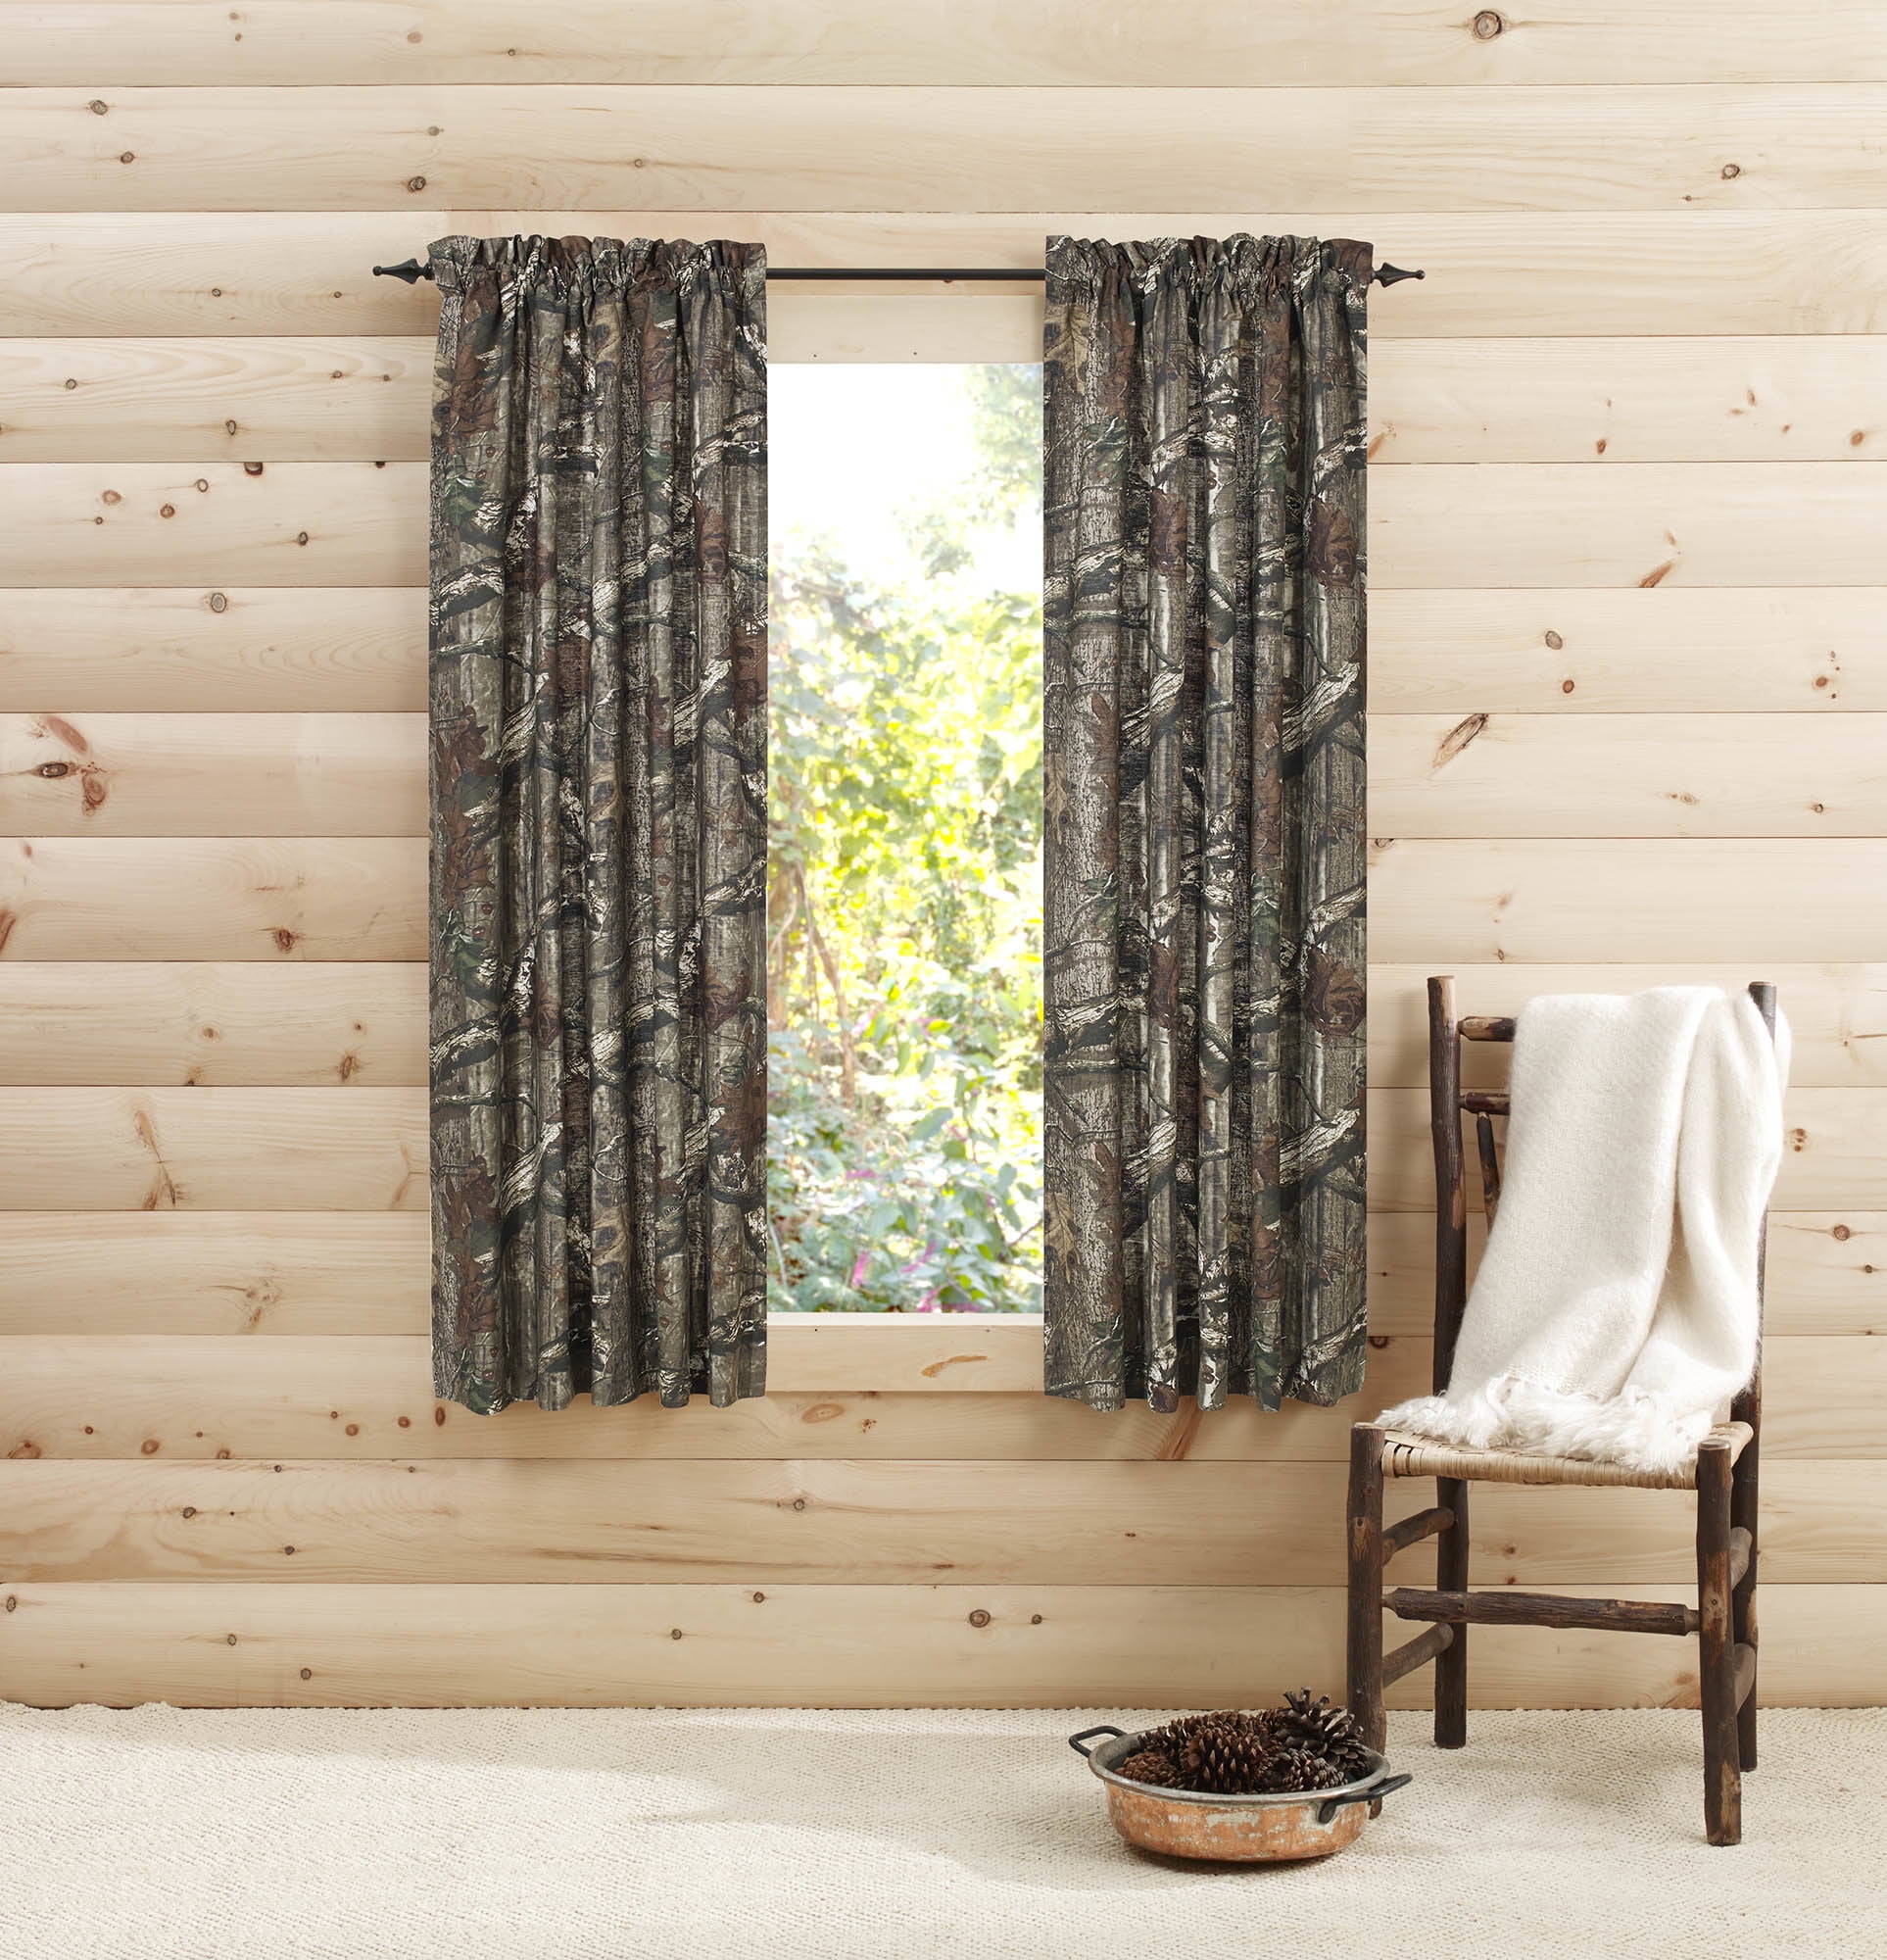 BRIGHT PINK CAMO THE WOODS CURTAINS 5 PC SET AND VALANCE DRAPES NEW WOODS DRAPES 